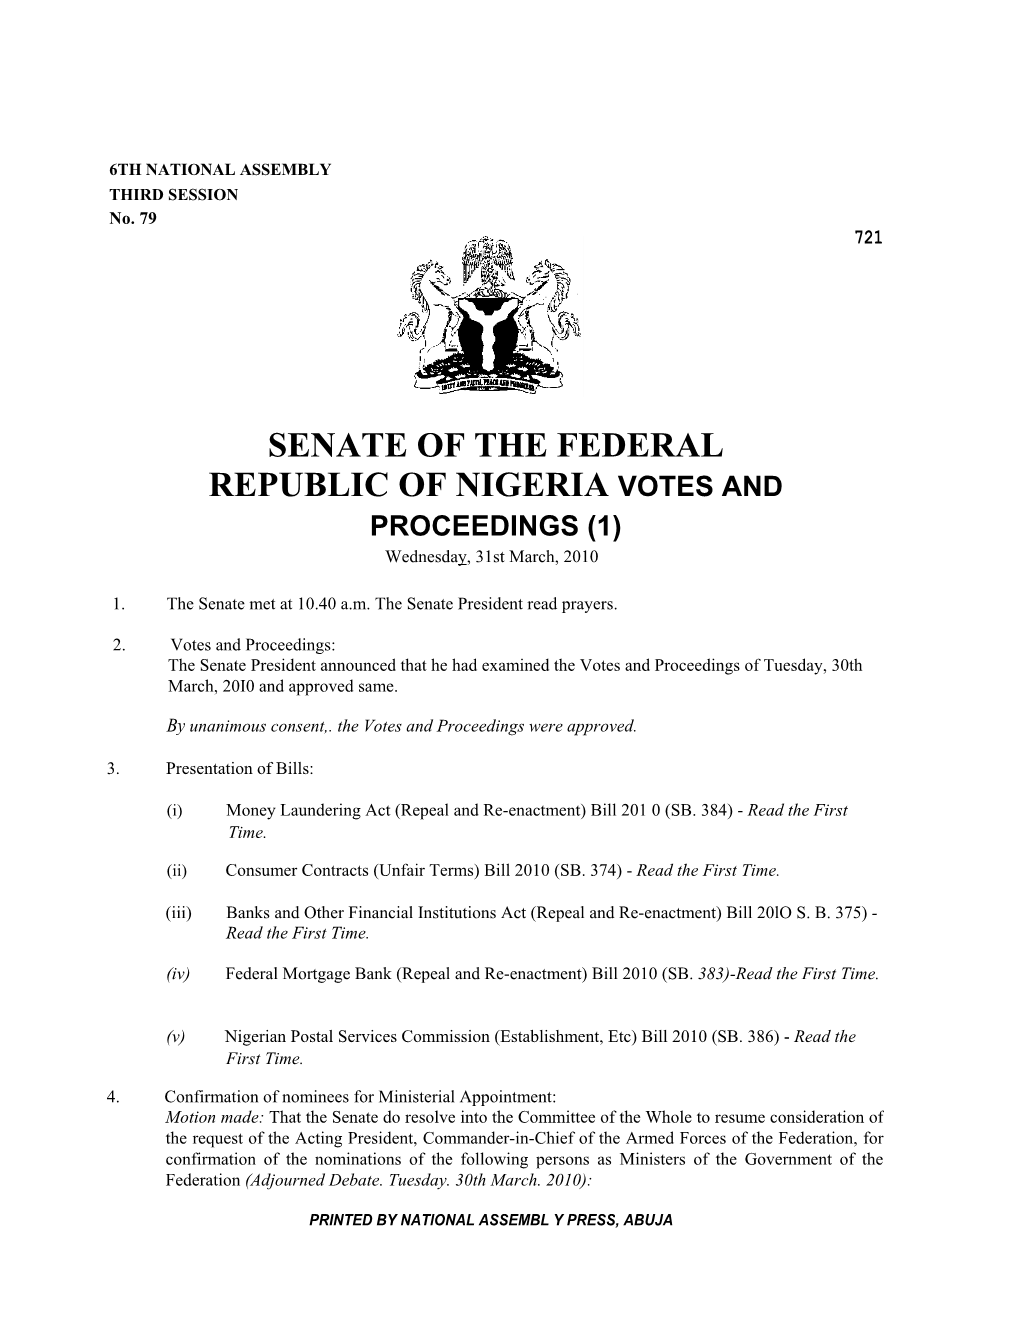 SENATE of the FEDERAL REPUBLIC of NIGERIA VOTES and PROCEEDINGS (1) Wednesday, 31St March, 2010